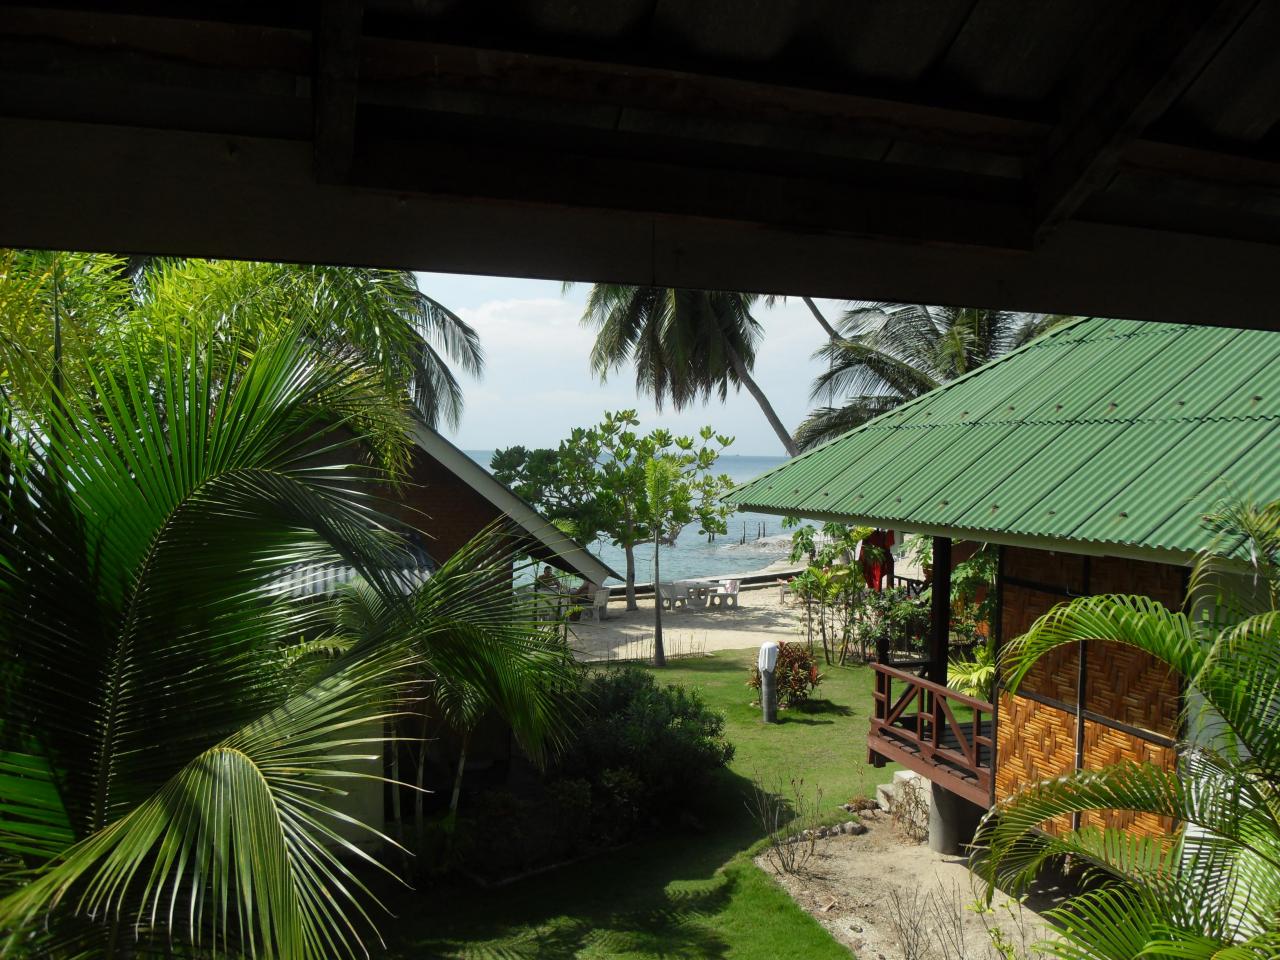 View from bungalow to ocean, Haad Tian